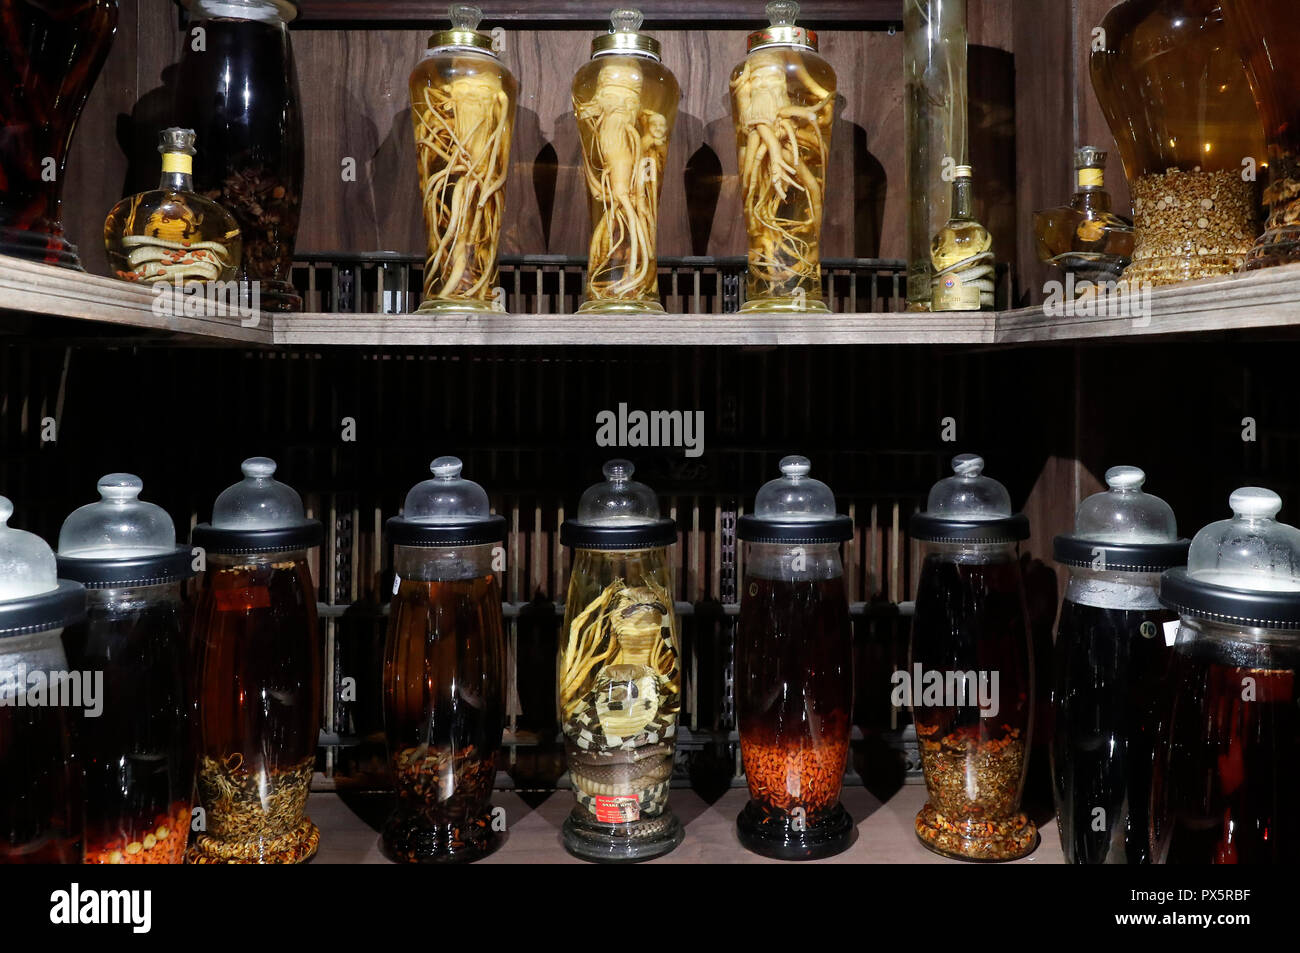 Museum of Traditional Vietnamese Medicine.  Bottle with herbs, ginseng  and  snake wine. Pharmacy.  Ho Chi Minh City. Vietnam. Stock Photo